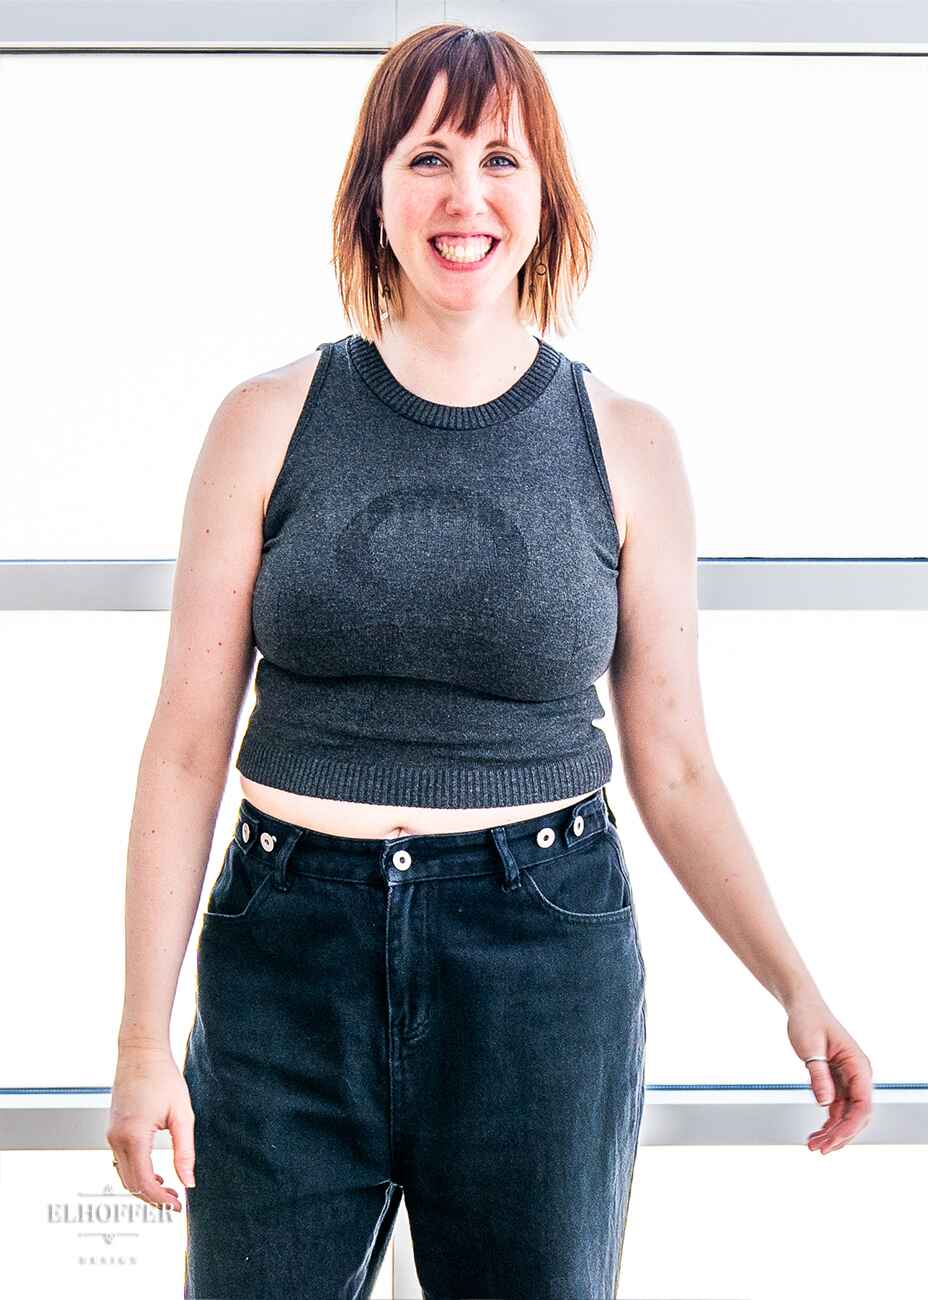 Jes, a fair skinned S model with short red hair with bangs, is caught mid laugh while wearing a dark grey sleeveless knit crop top with a large subtle ankh design on the front.